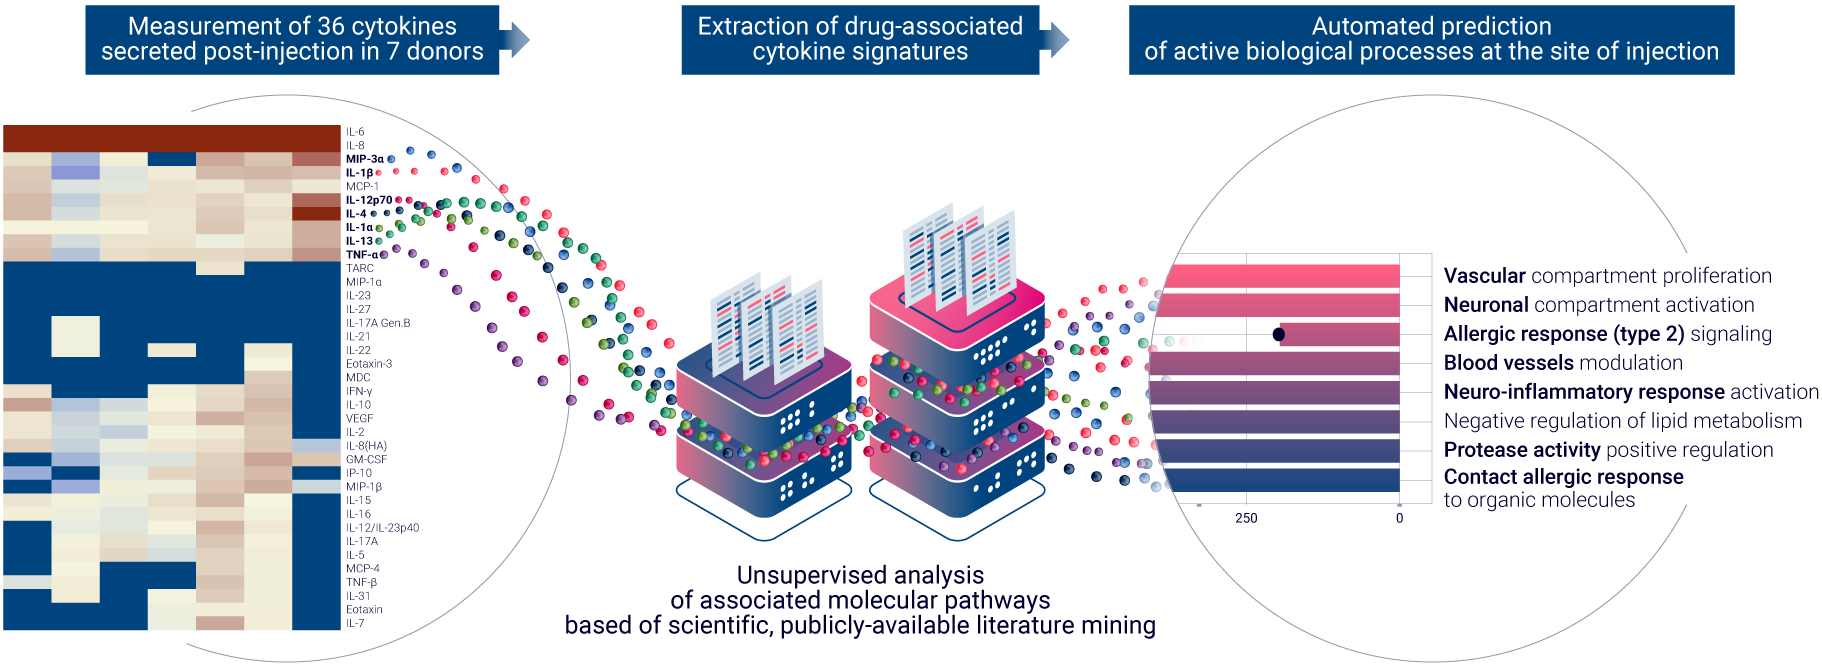 Visual representation of the process starting with the measurement of cytokines secreted after ex vivo injection of Cetrorelix in HypoSkin® technology, followed by advanced computational methods, leading to the identification and analysis of relevant biological pathways in the context of non clinical safety assessment